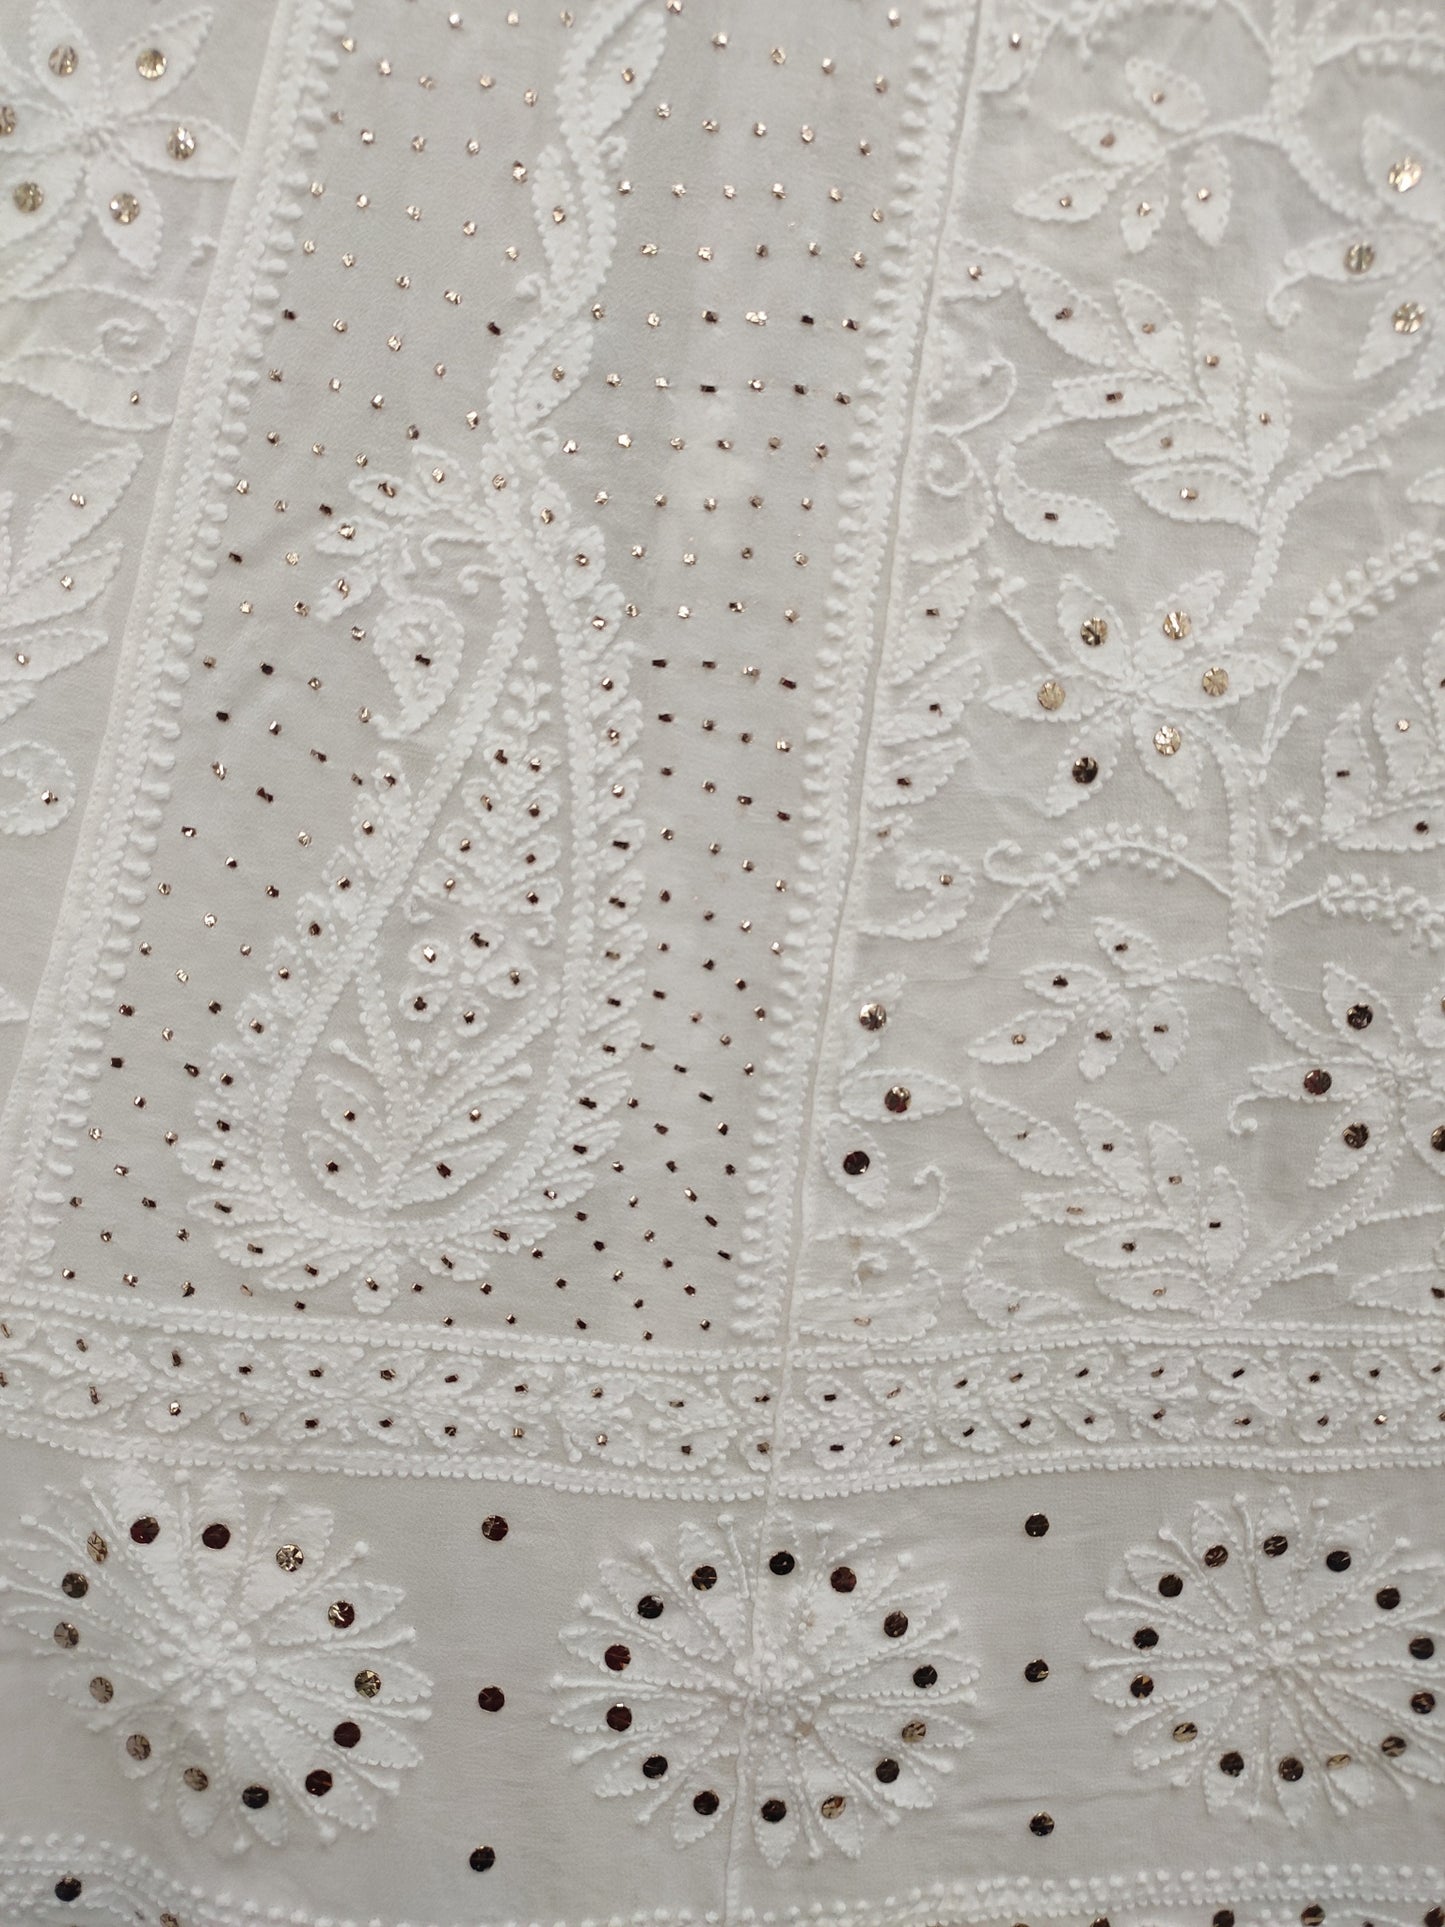 Hand Embroidered White HQ Viscose Georgette Lucknowi Chikankari Unstitched Anarkali (Set of 2) With Mukaish Work S20463